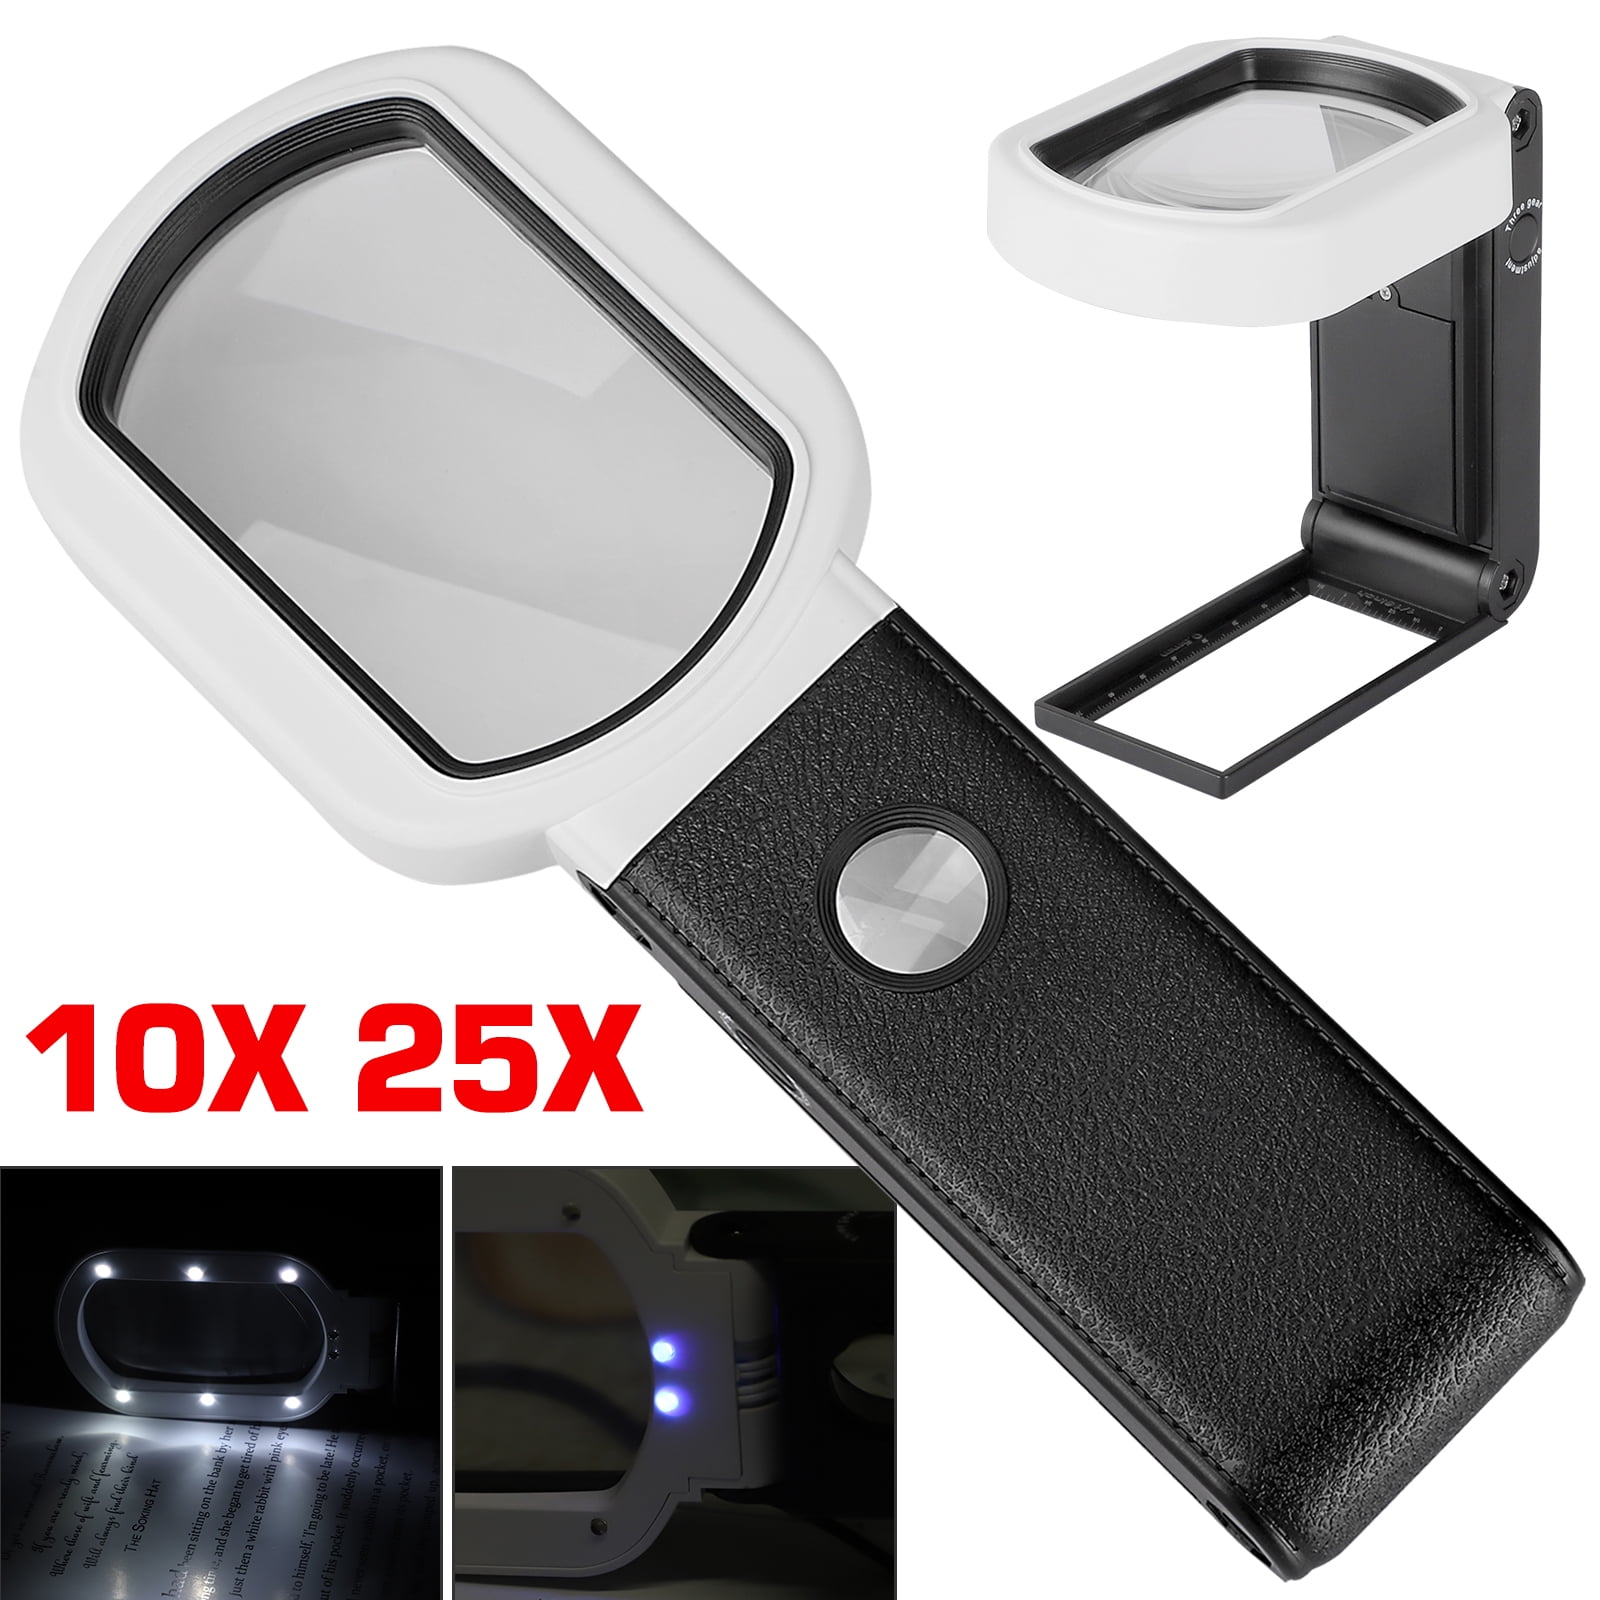 Magnifying Glass with Bright LED Light - 3X and 15X Magnification for –